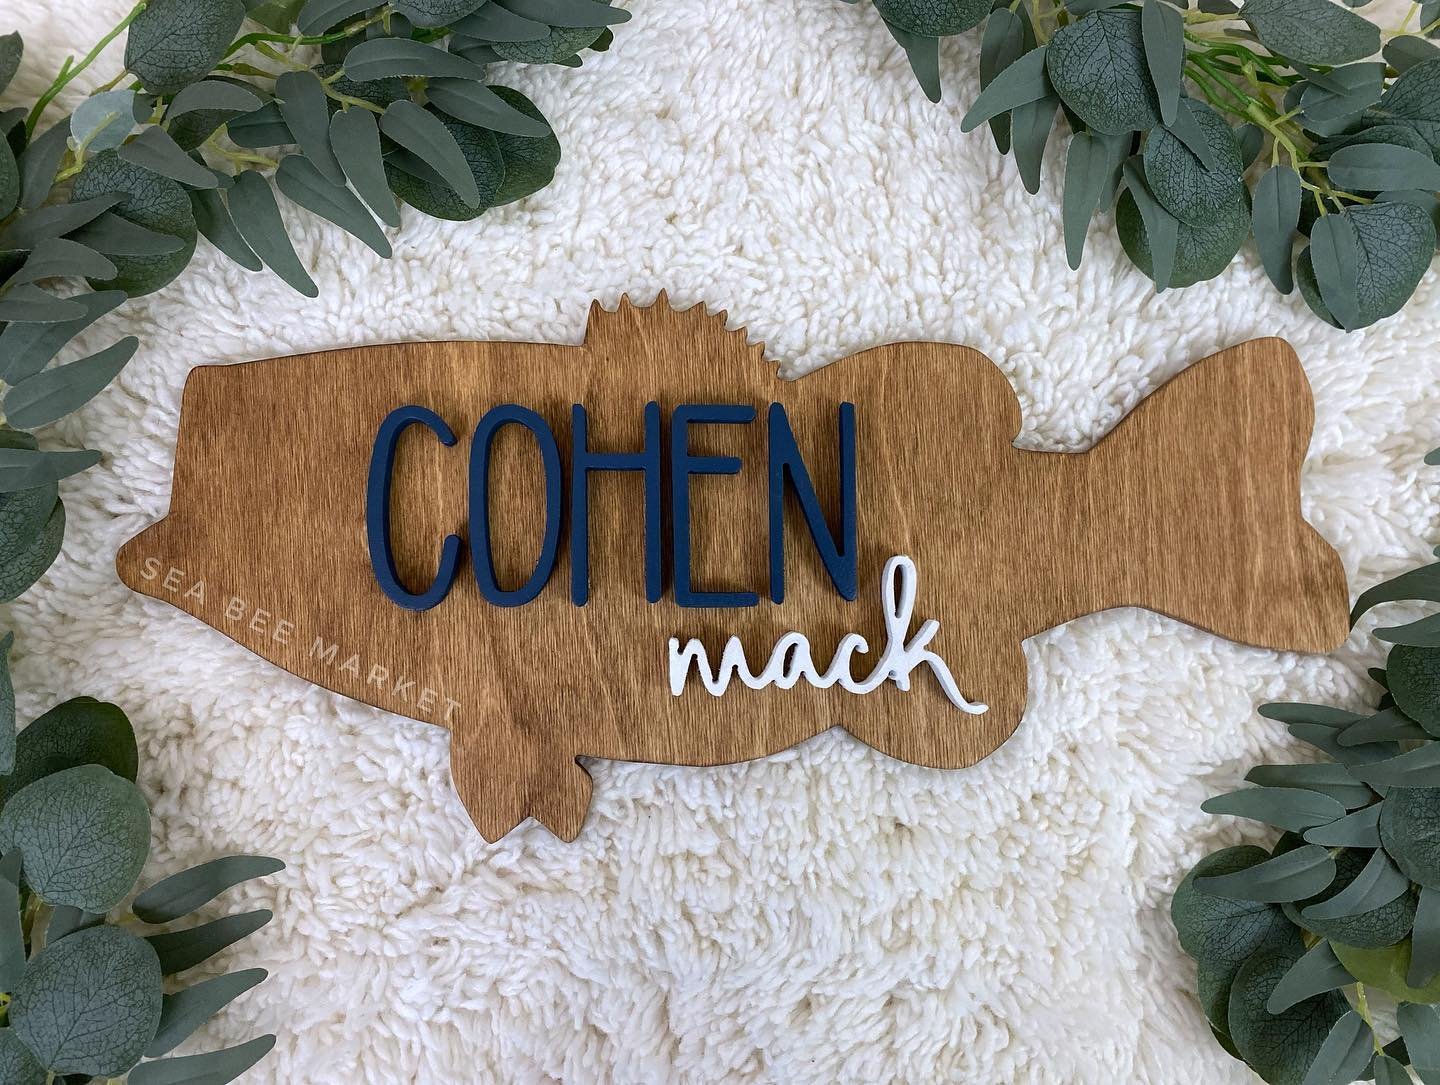 This brand new design is available now! How stinking cute is this largemouth bass name sign?! 😍😍

#bassfishing #fishingnursery #fisherman #bassmaster